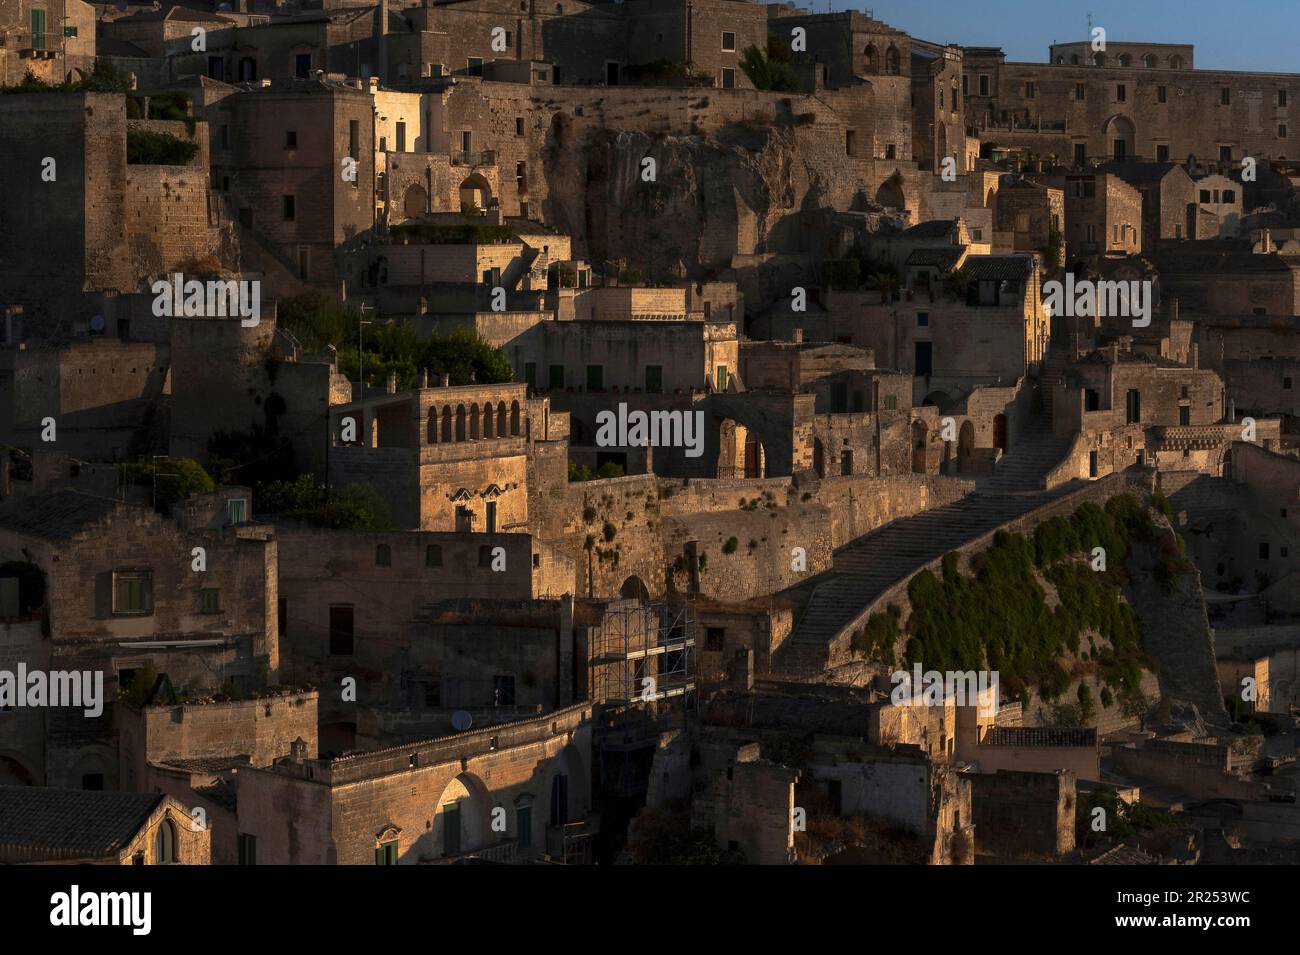 The Sasso Barisano, one of two ‘underground cities’ in Matera, Basilicata, Italy. Troglodyte dwellings have been re-faced and transformed, many with the addition of conventional facades and roof terraces. Stock Photo